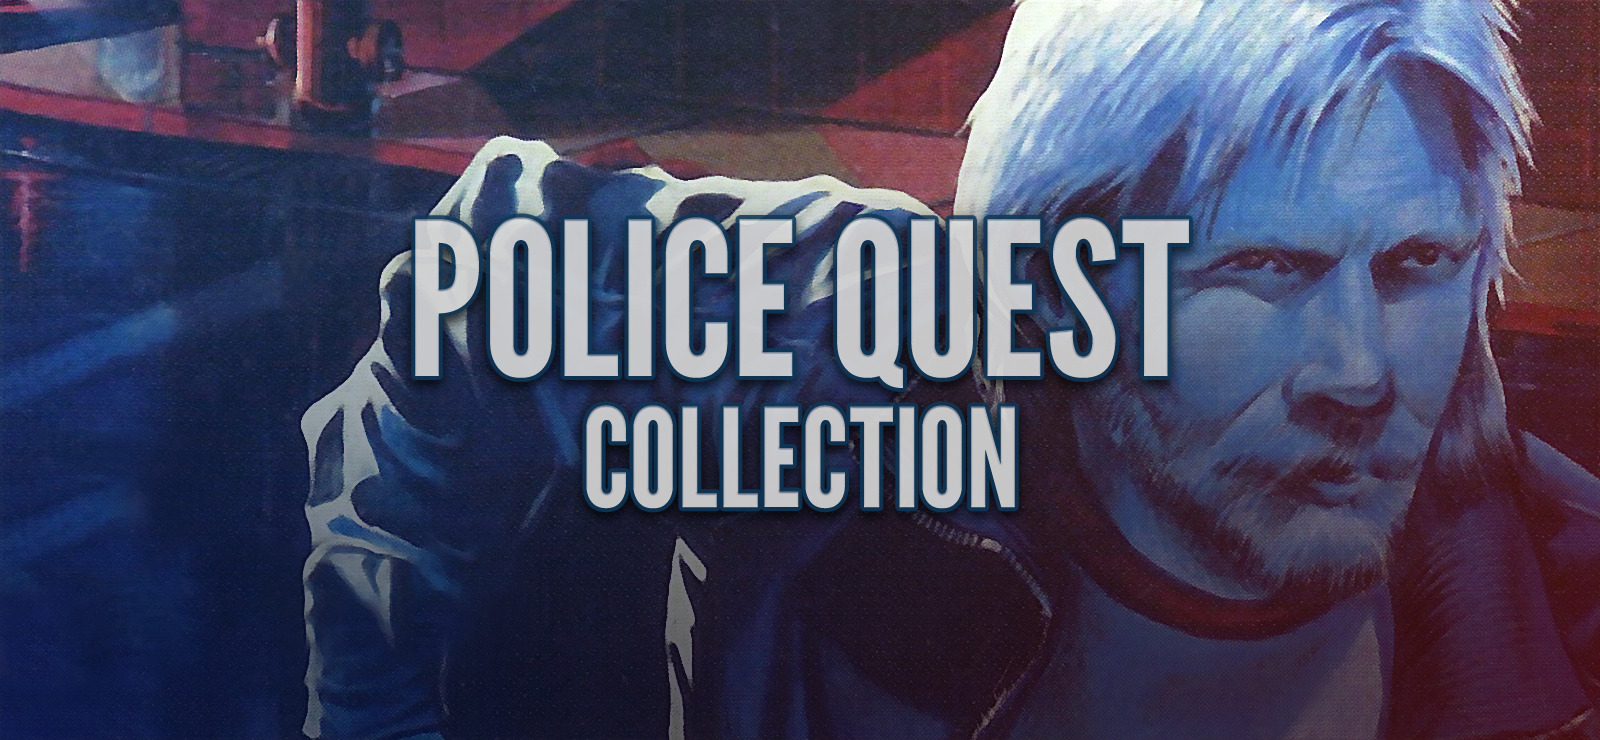 Police Quest III: The Kindred